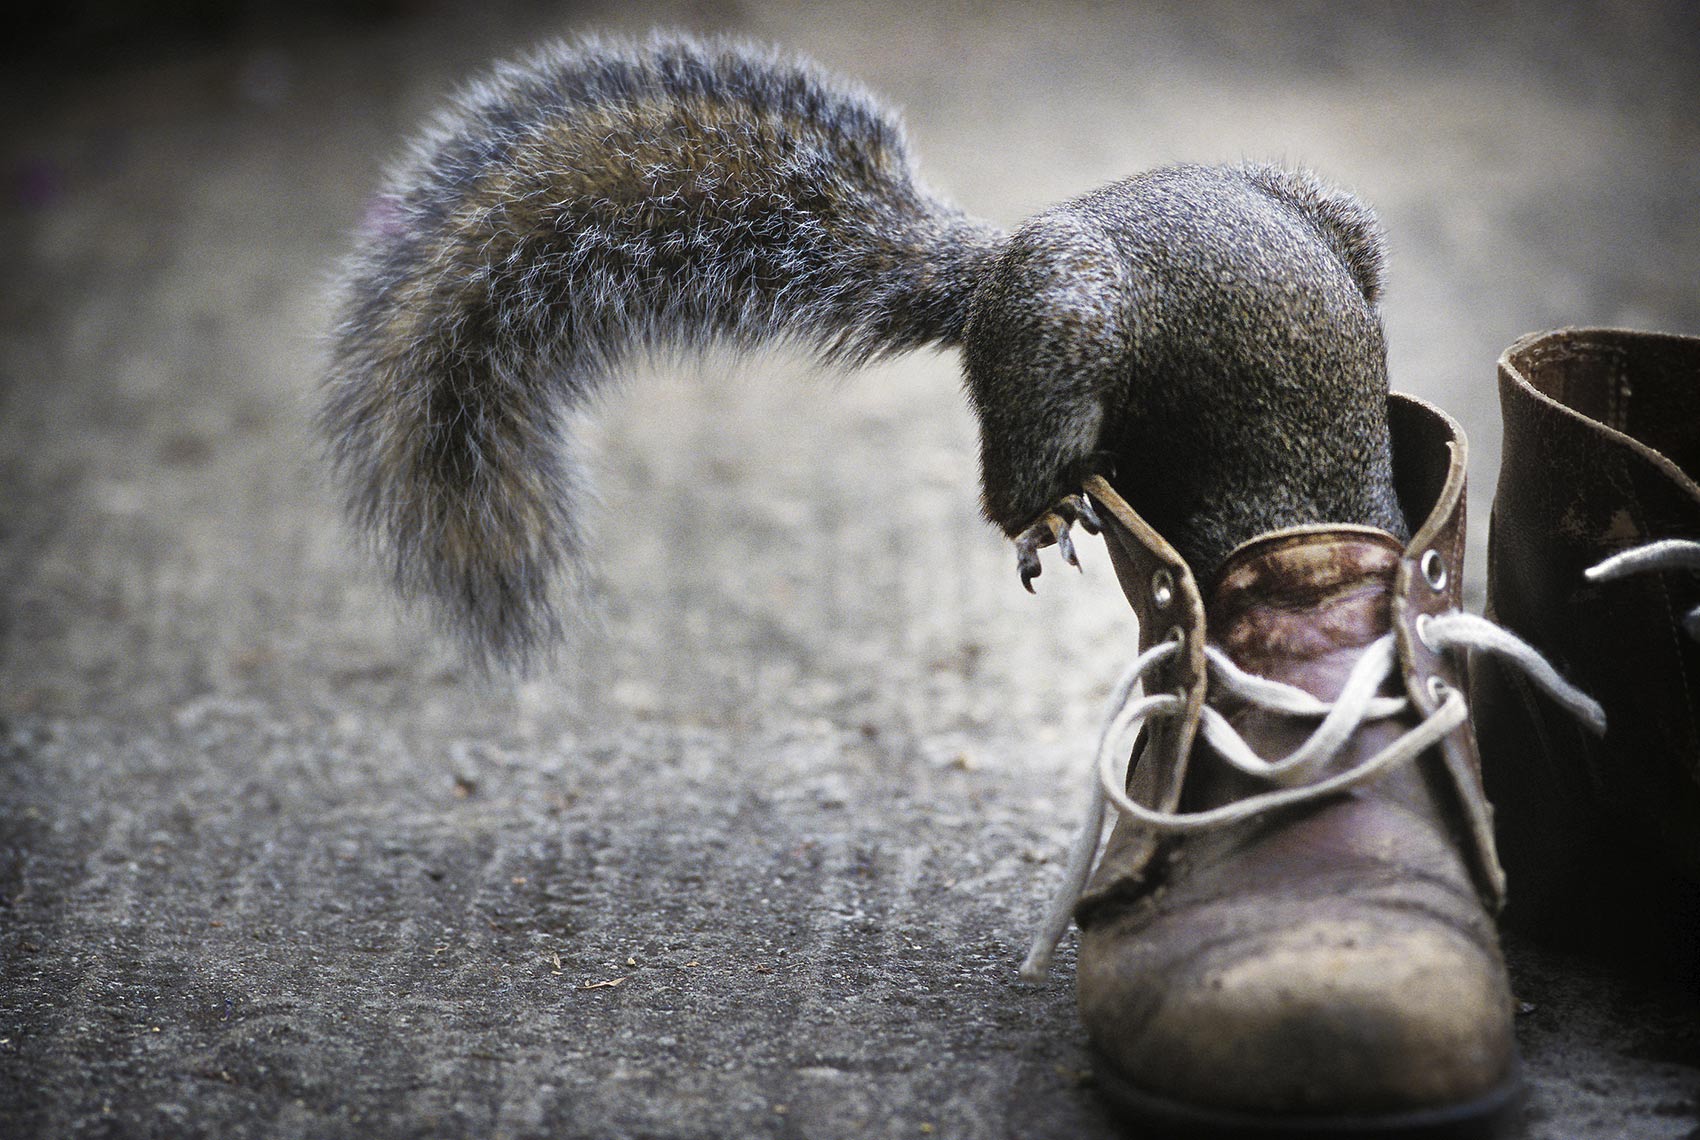 Grey squirrel in boots